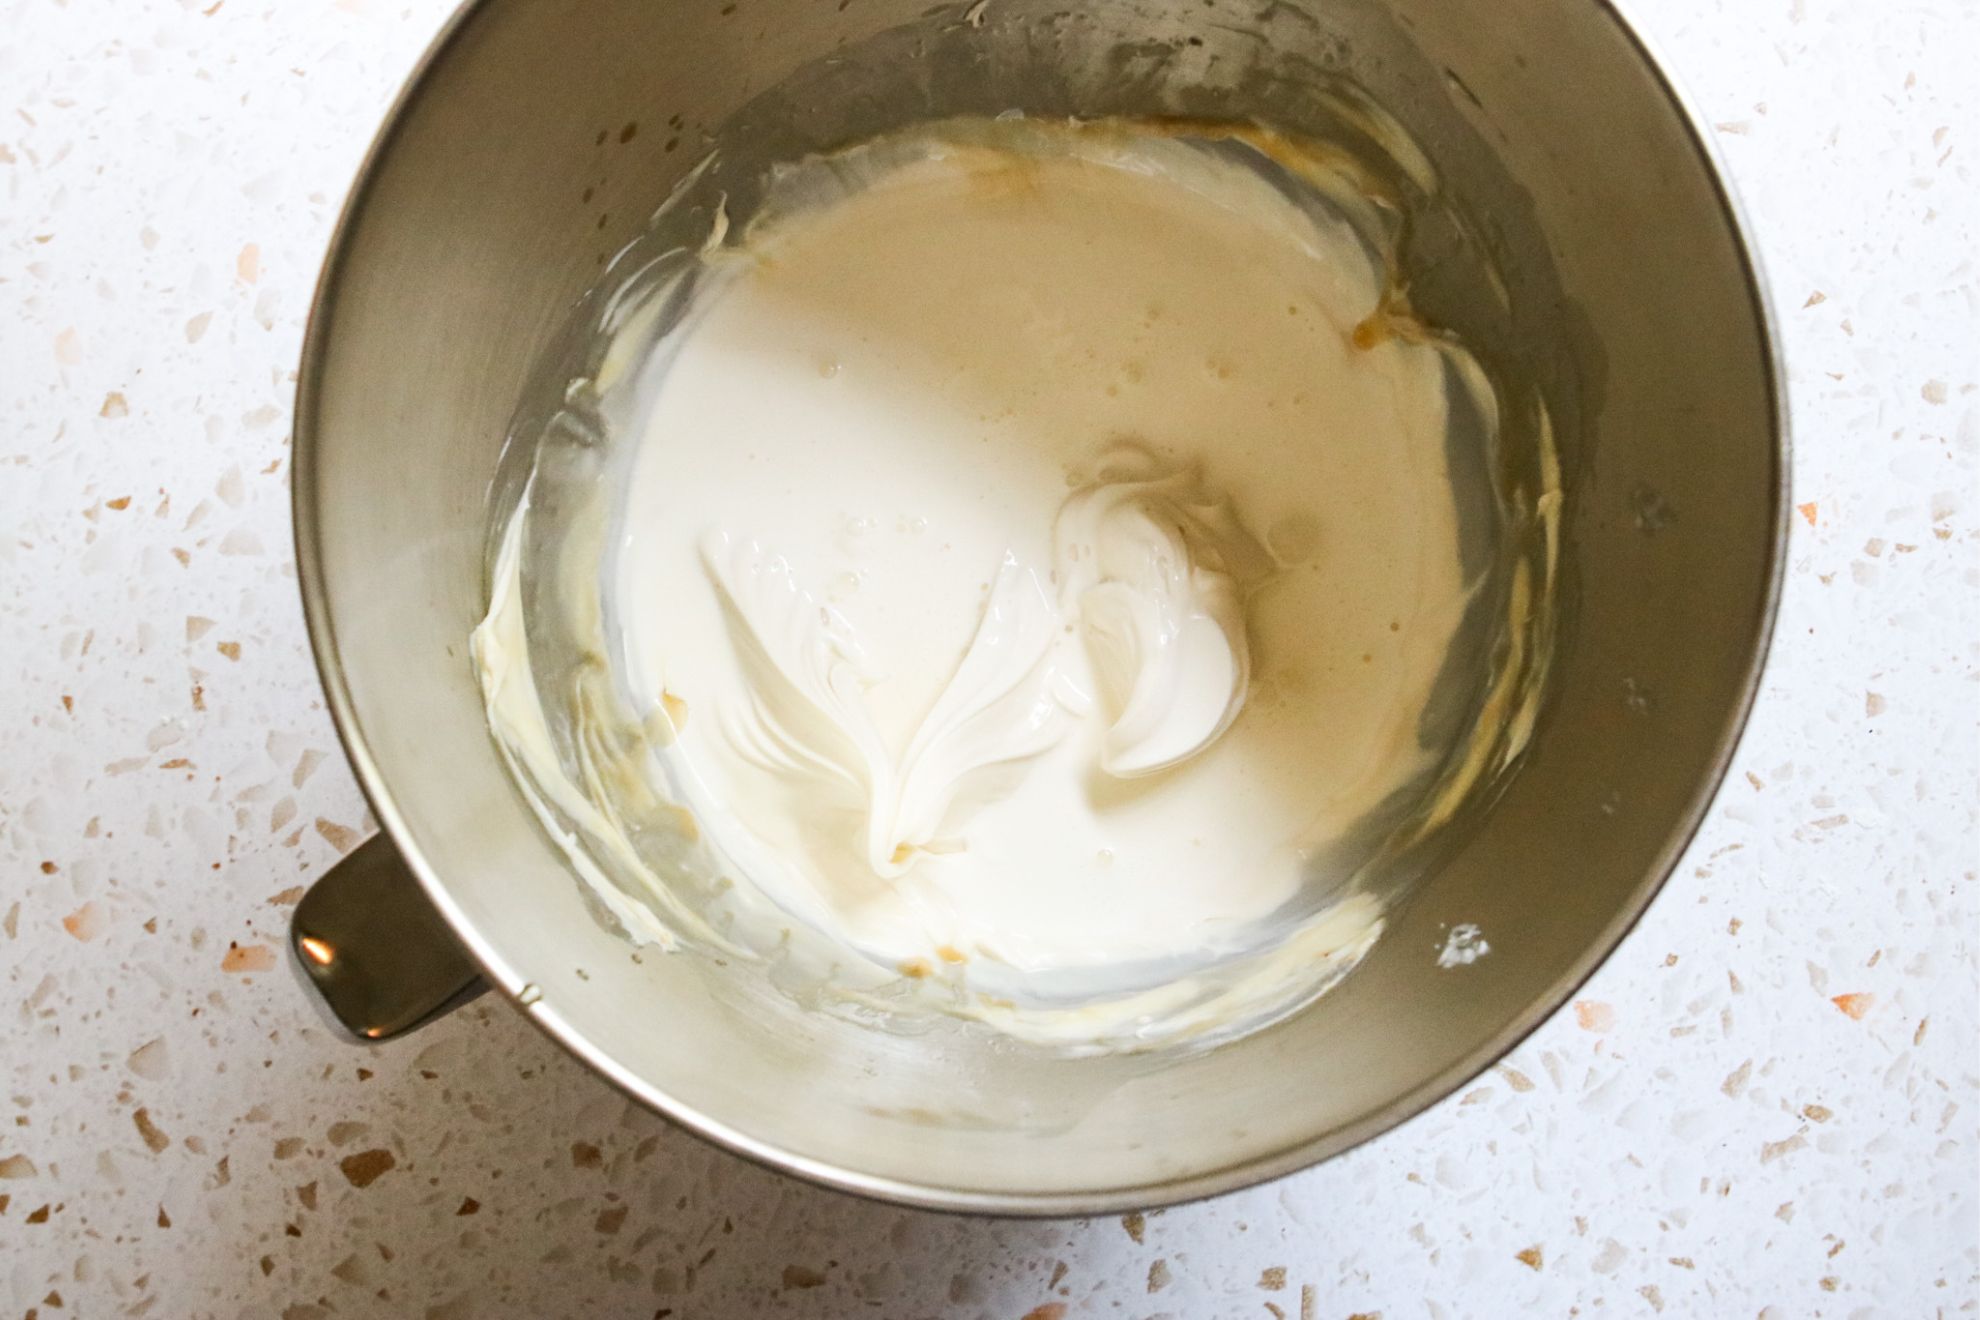 This is an overhead horizontal image of a silver mixing bowl with a vanilla frosting and heavy cream in it. The bowl sits on a light terrazzo surface.